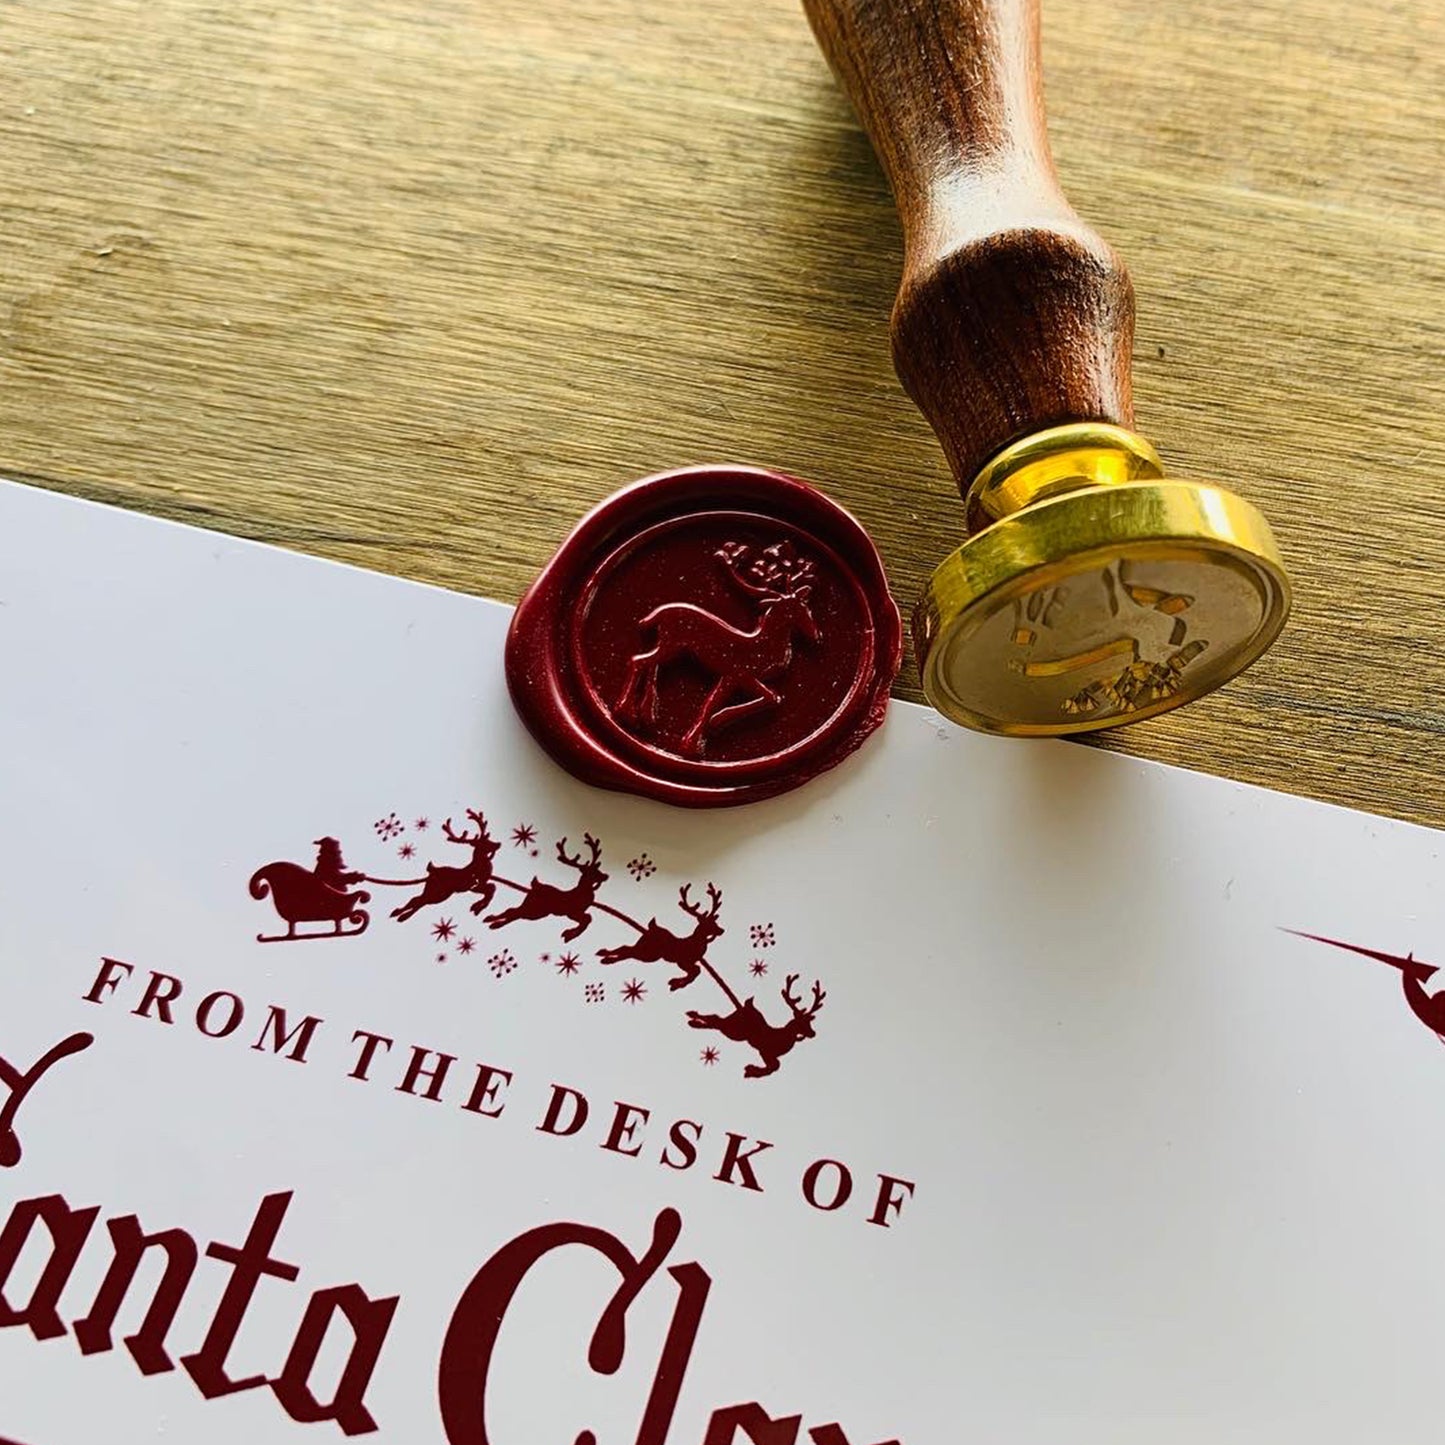 Letter from Santa Claus - RED DESIGN